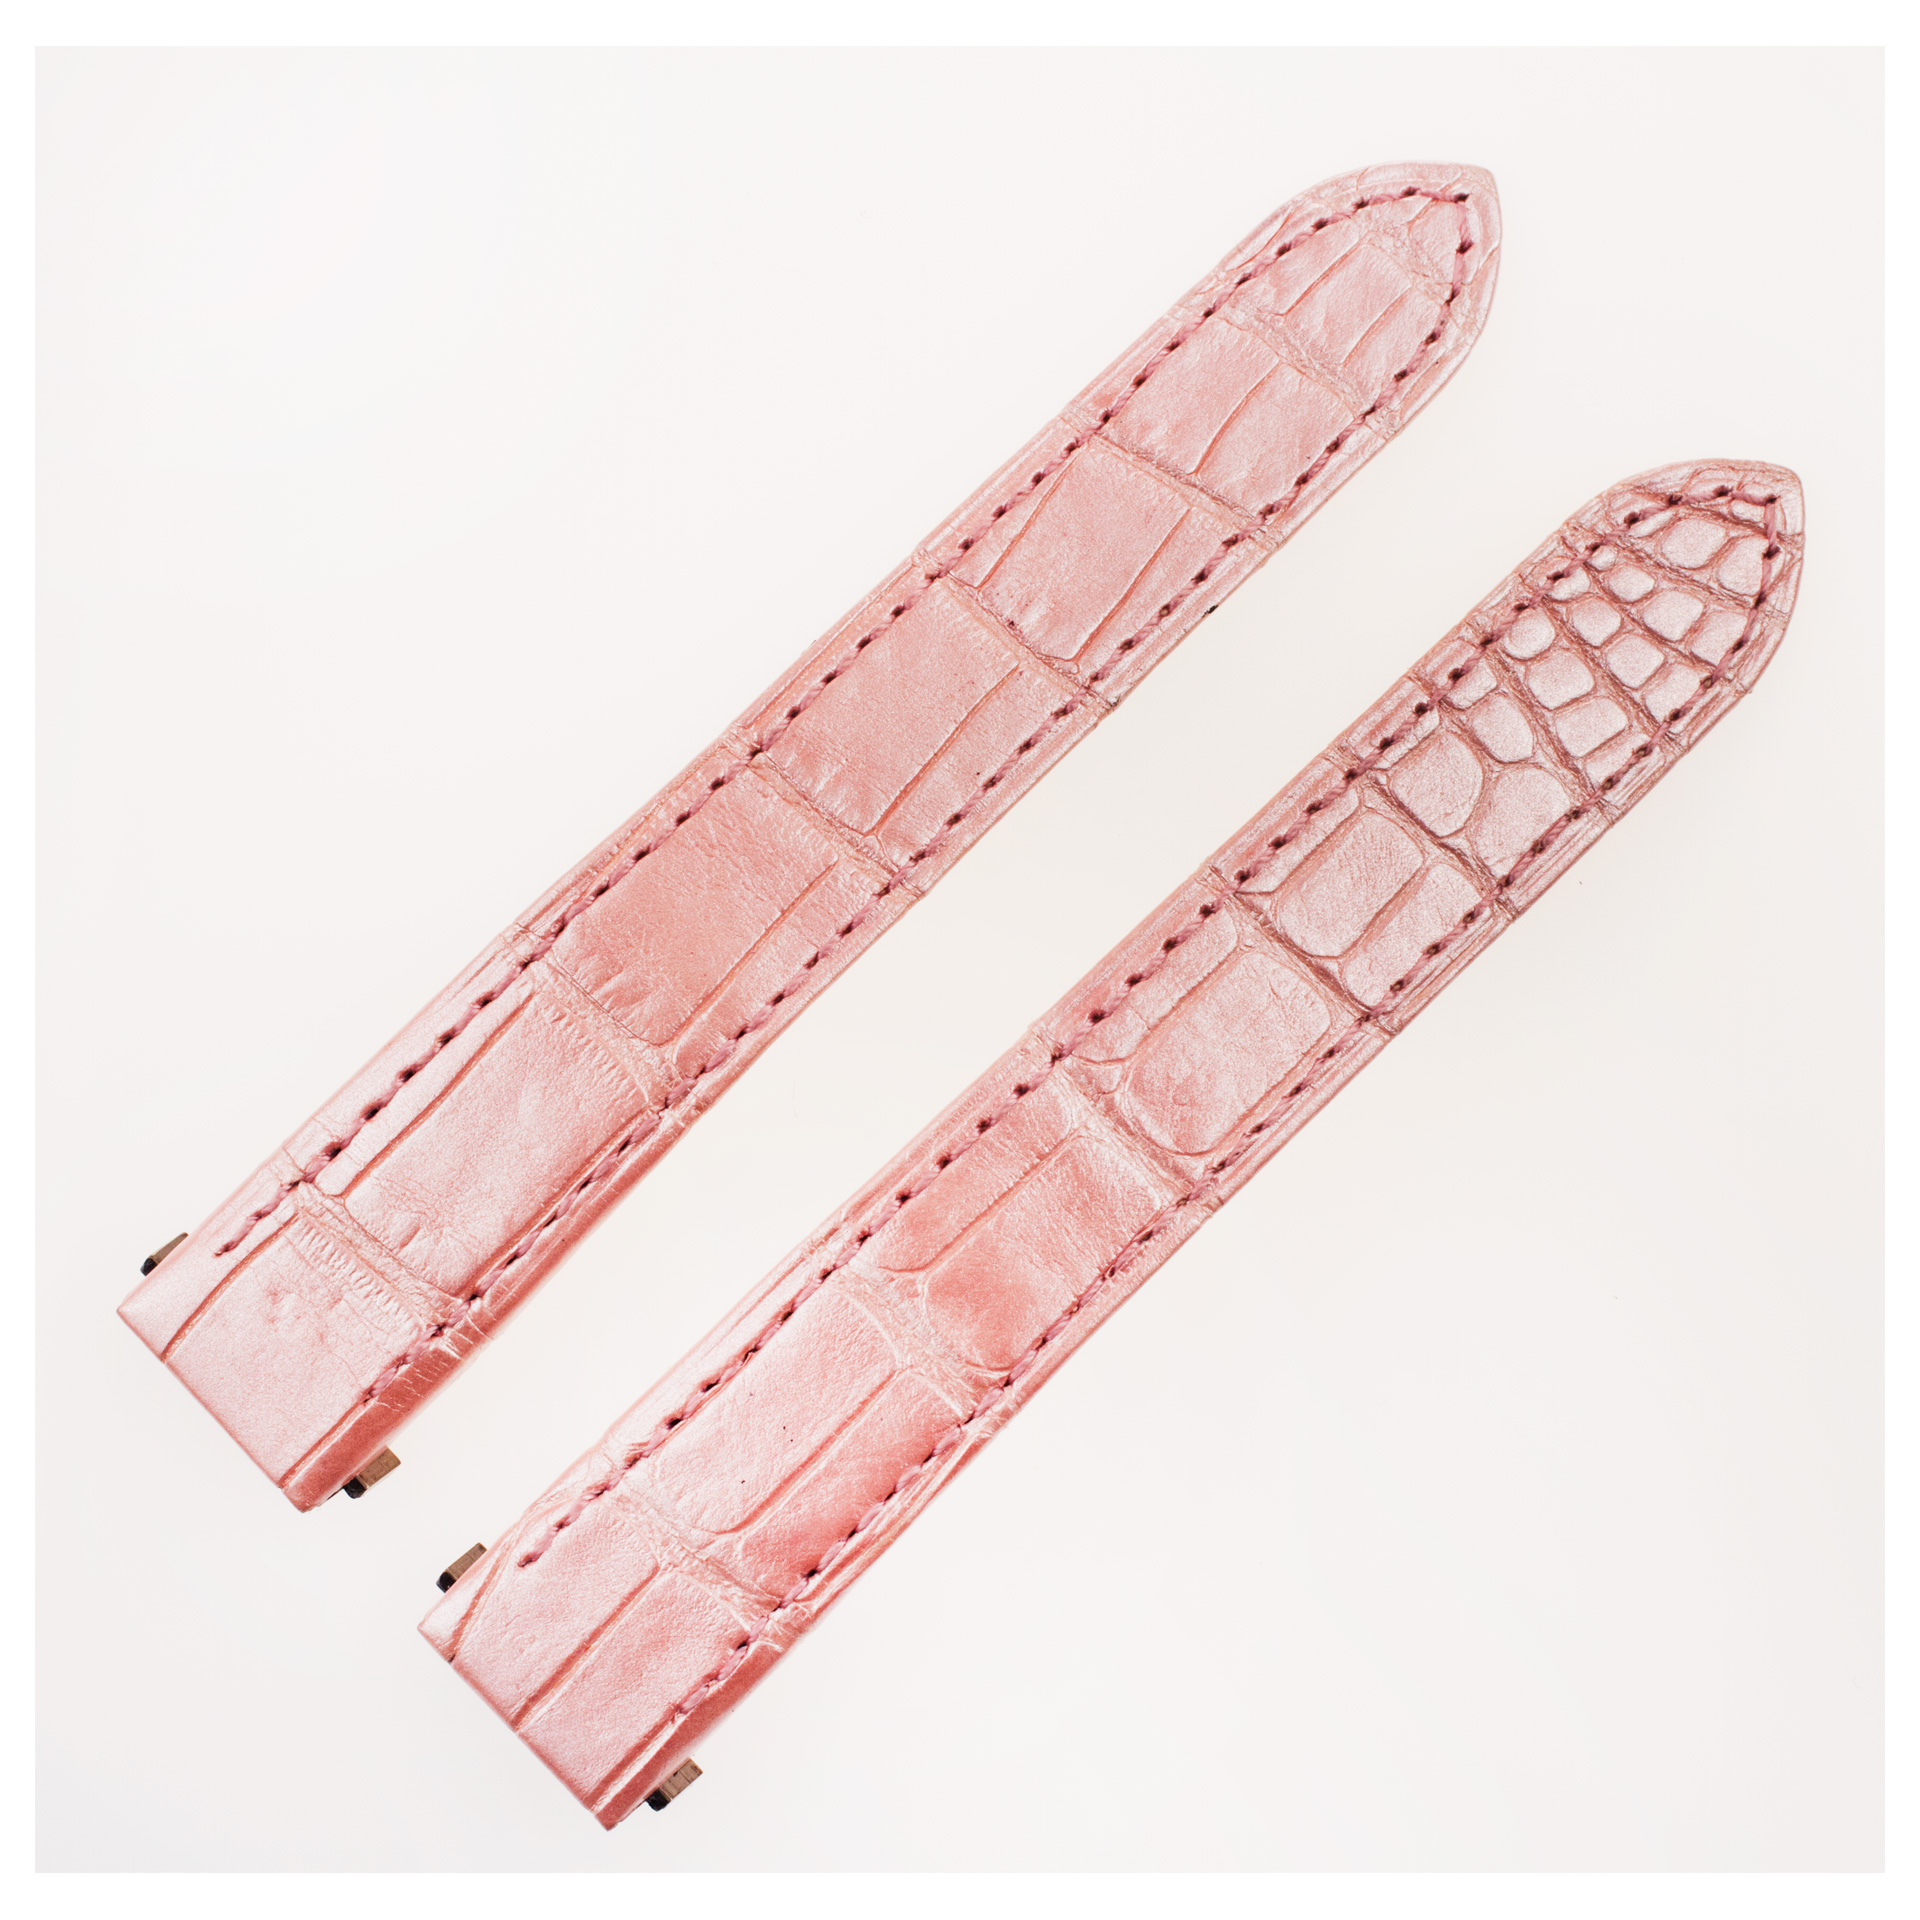 Cartier shiny pink alligator strap by 15mm lug and 4" length